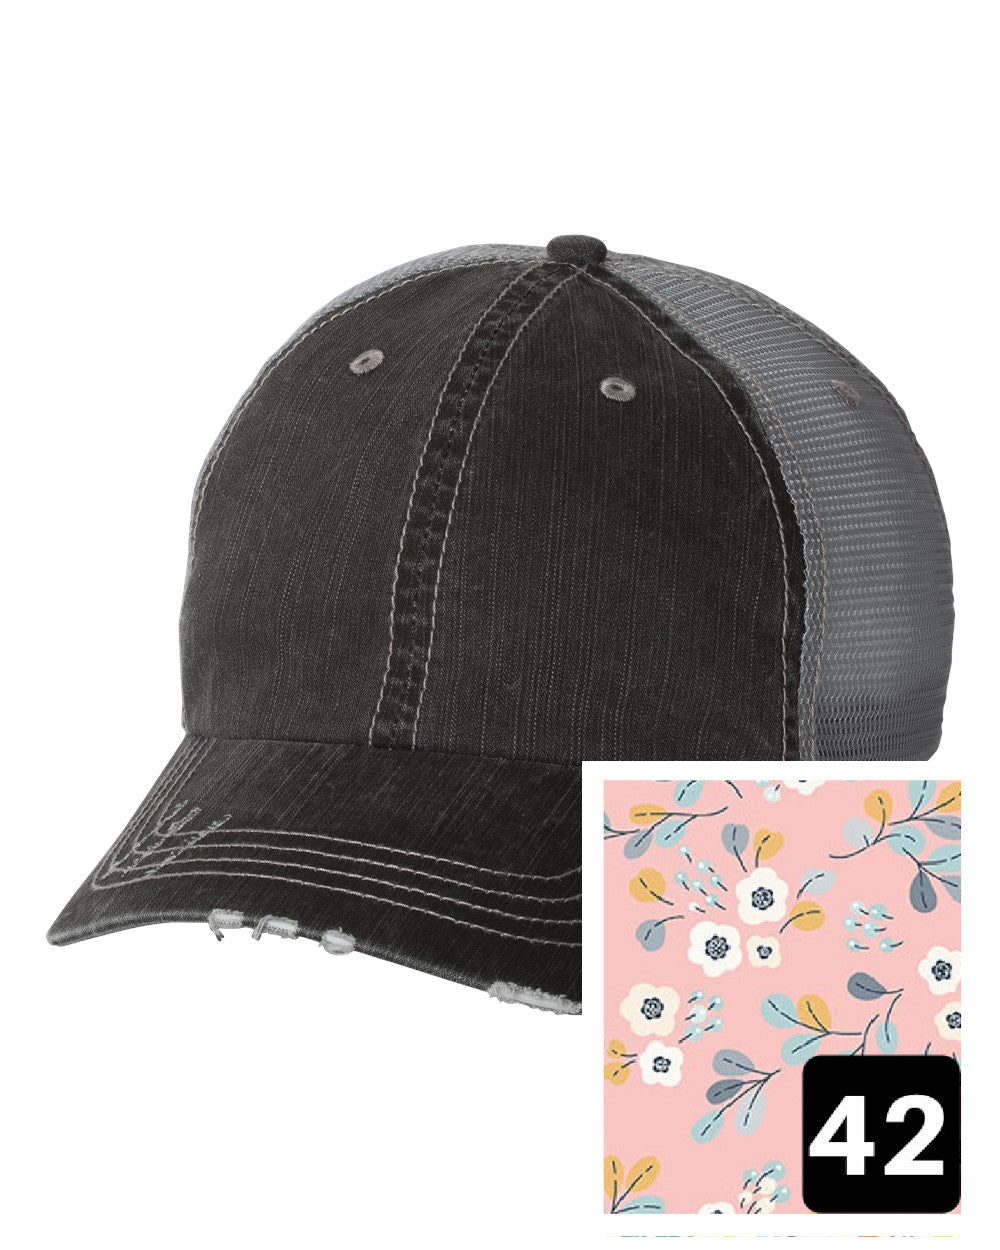 gray distressed trucker hat with light blue and pink mosaic fabric state of Ohio